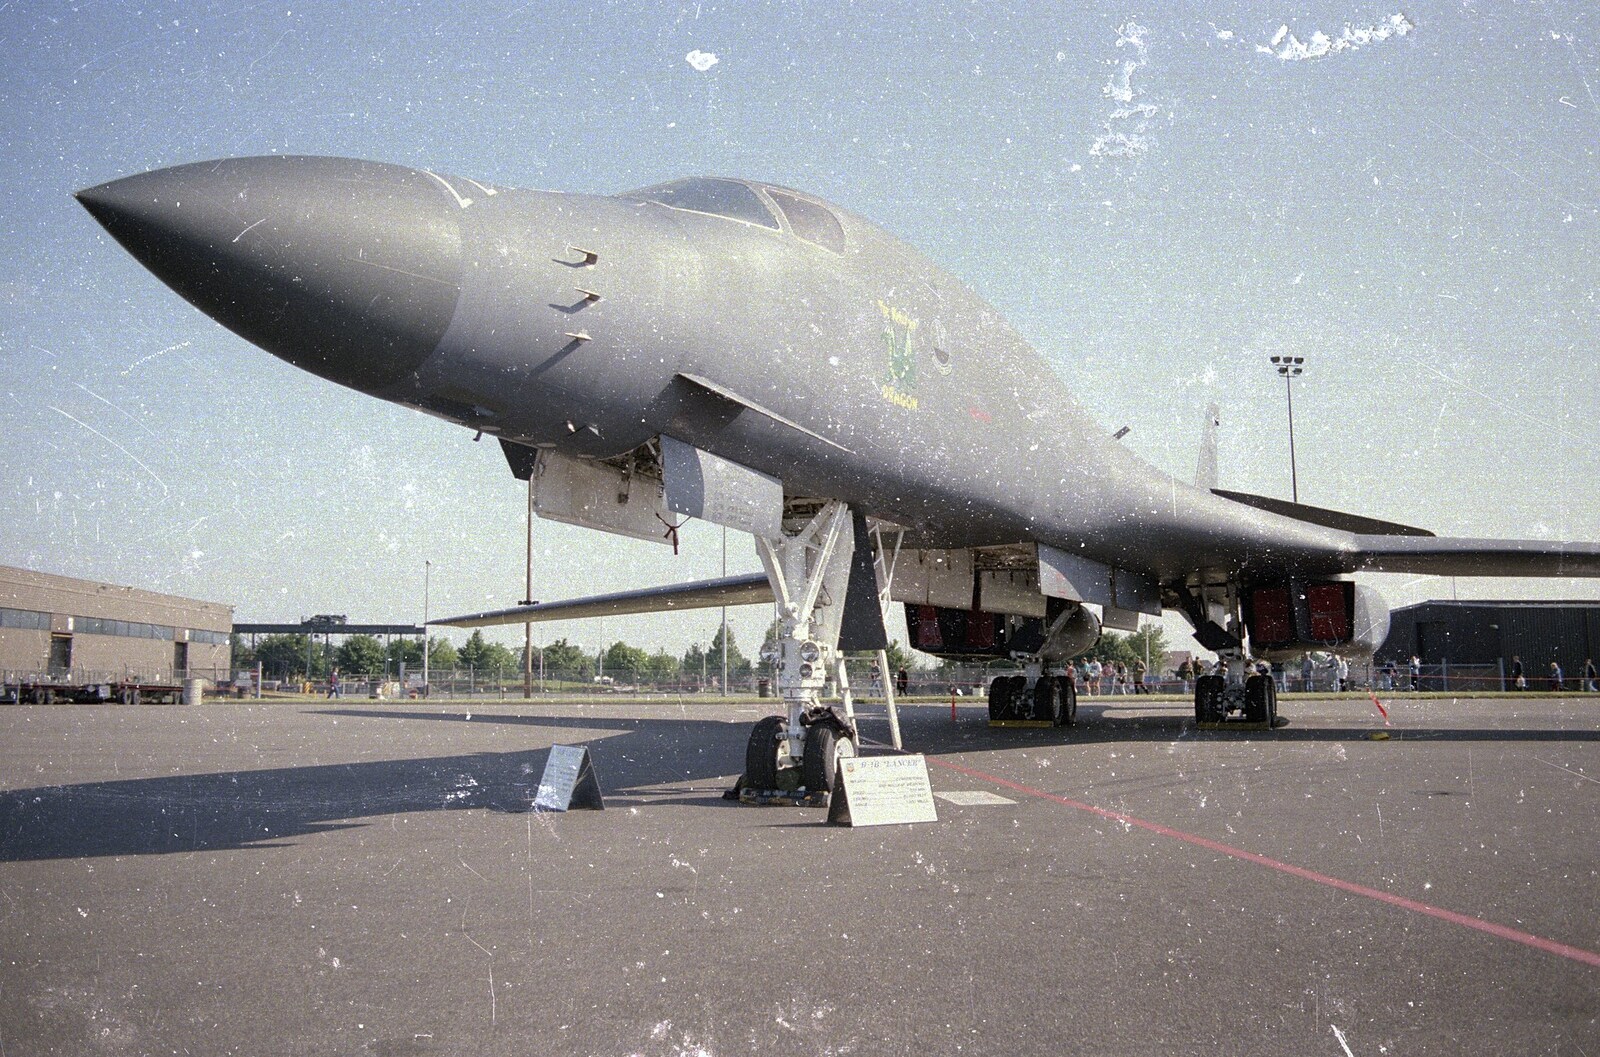 The B1-B Lancer from The Mildenhall Air Fete, Mildenhall, Suffolk - 29th May 1994